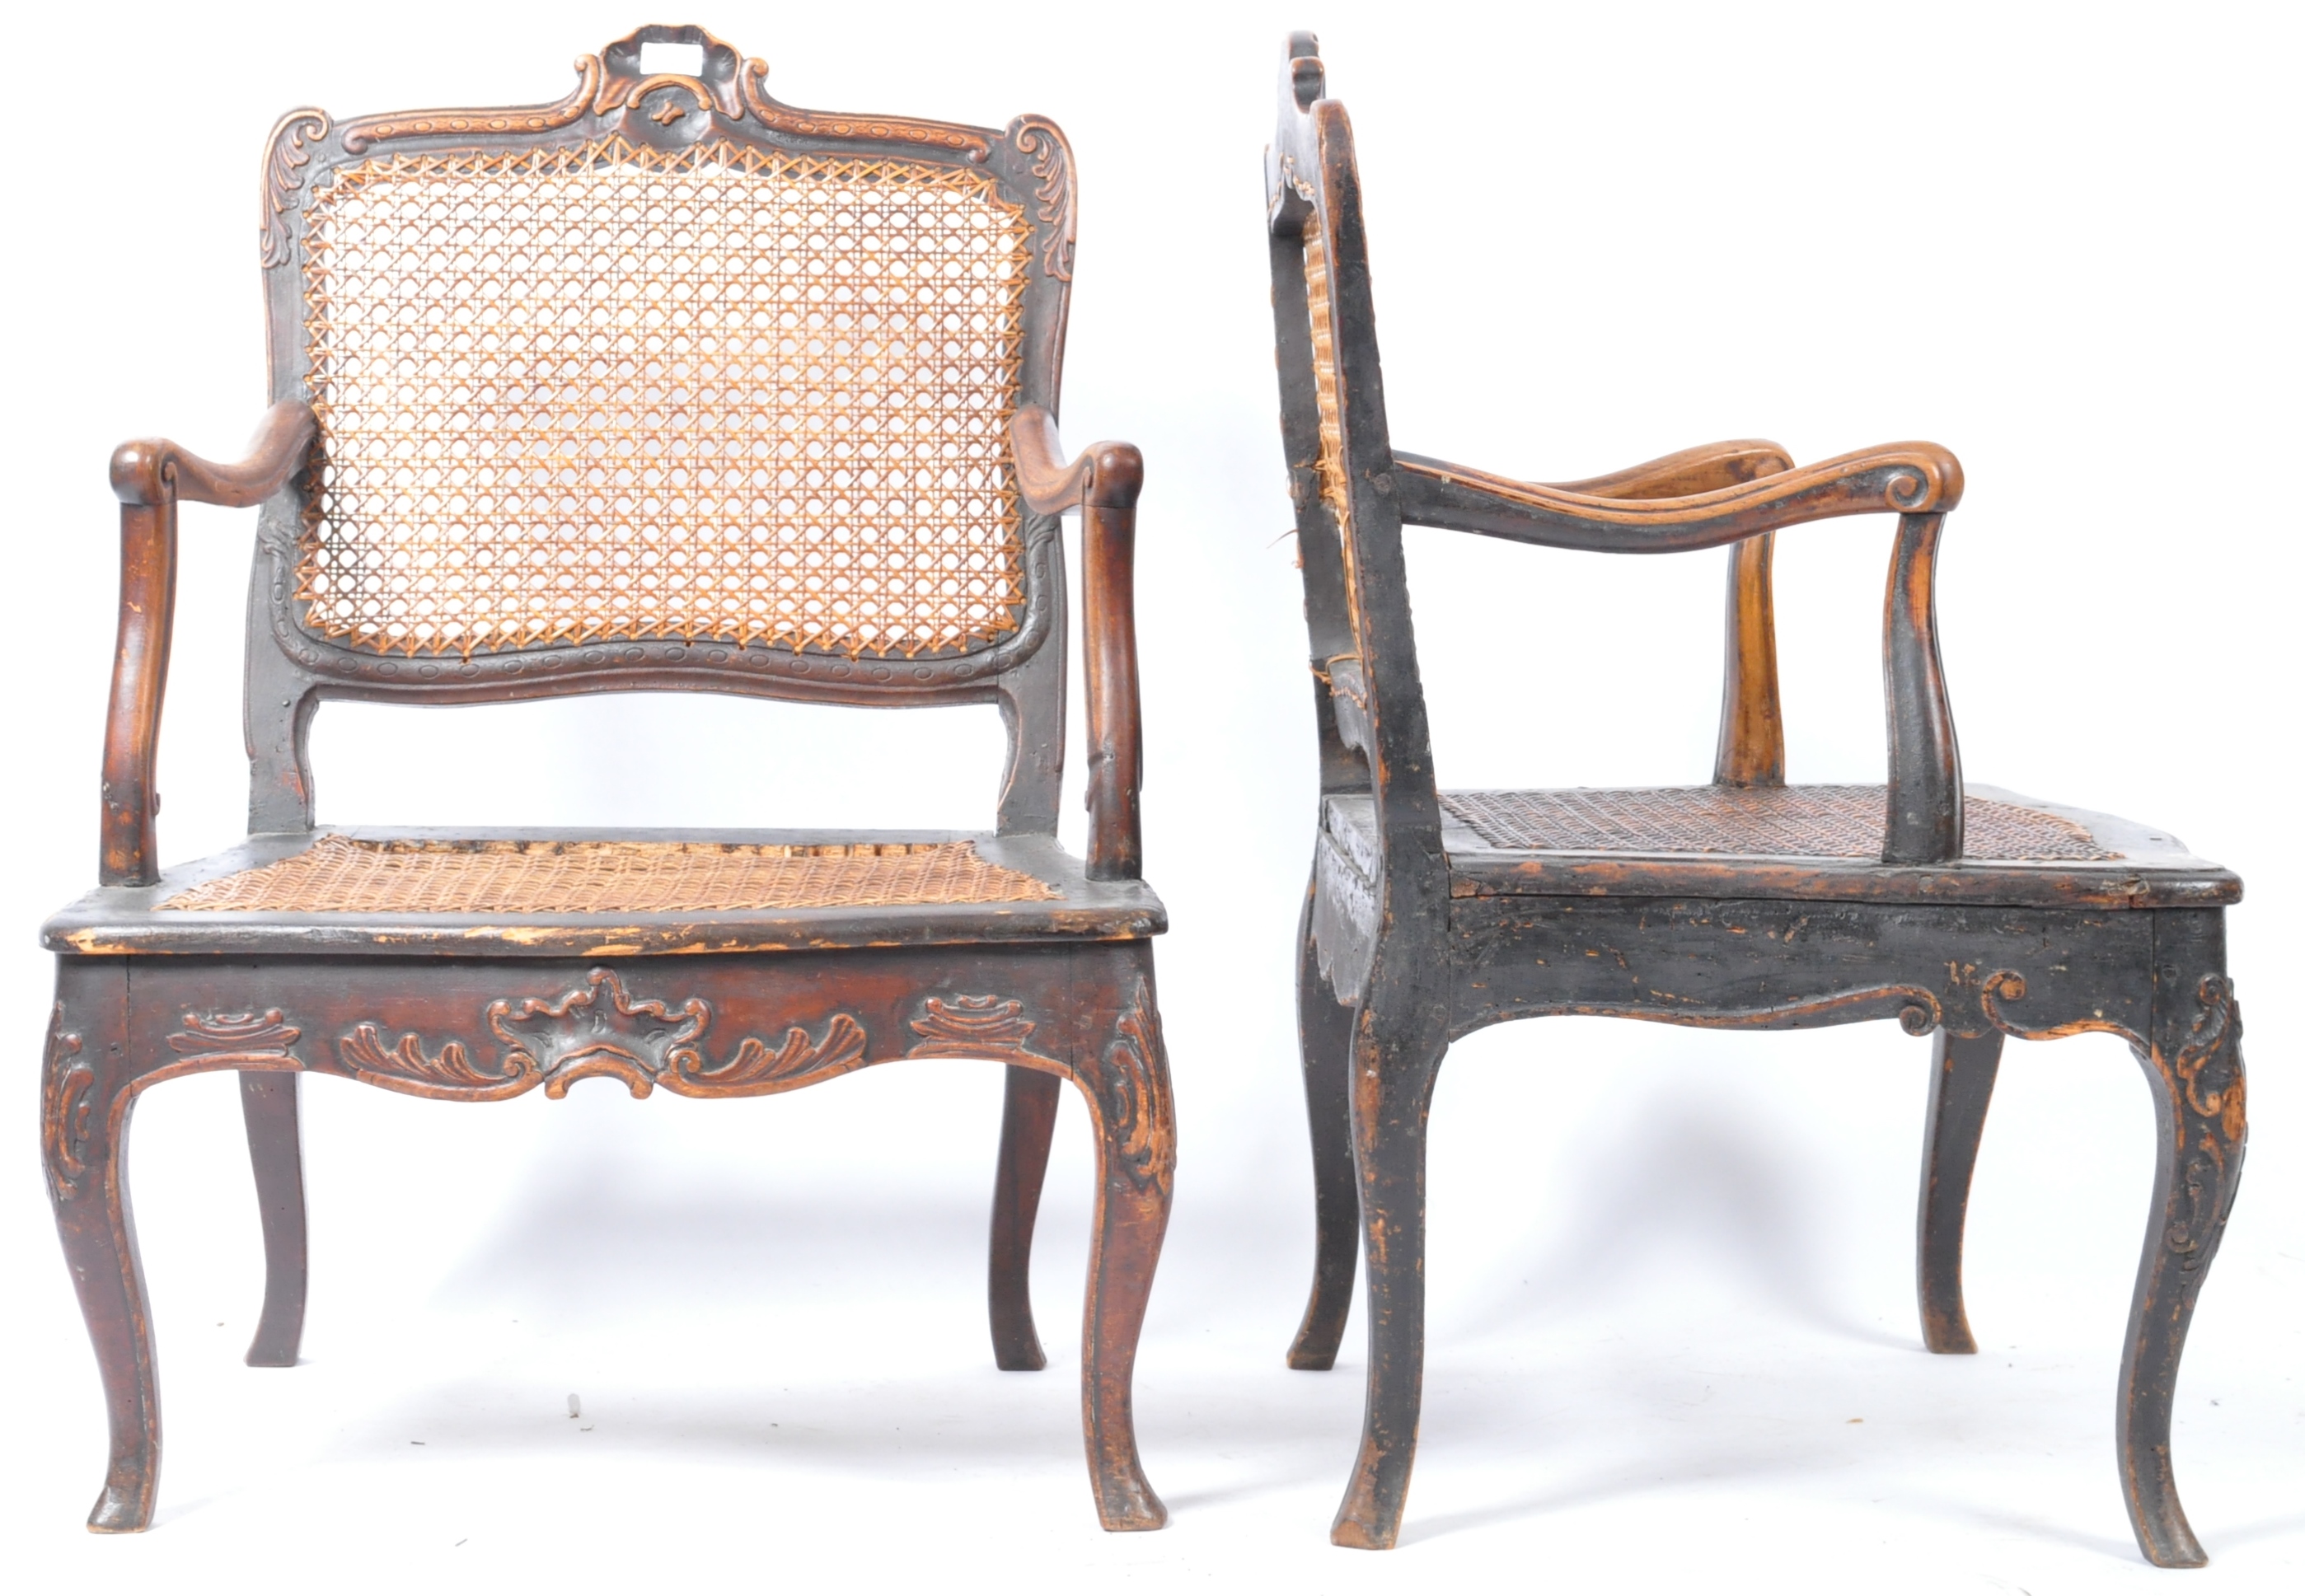 ANTIQUE PAIR OF 18TH CENTURY GEORGIAN CANE & WALNUT ELBOW CHAIRS - Image 6 of 9